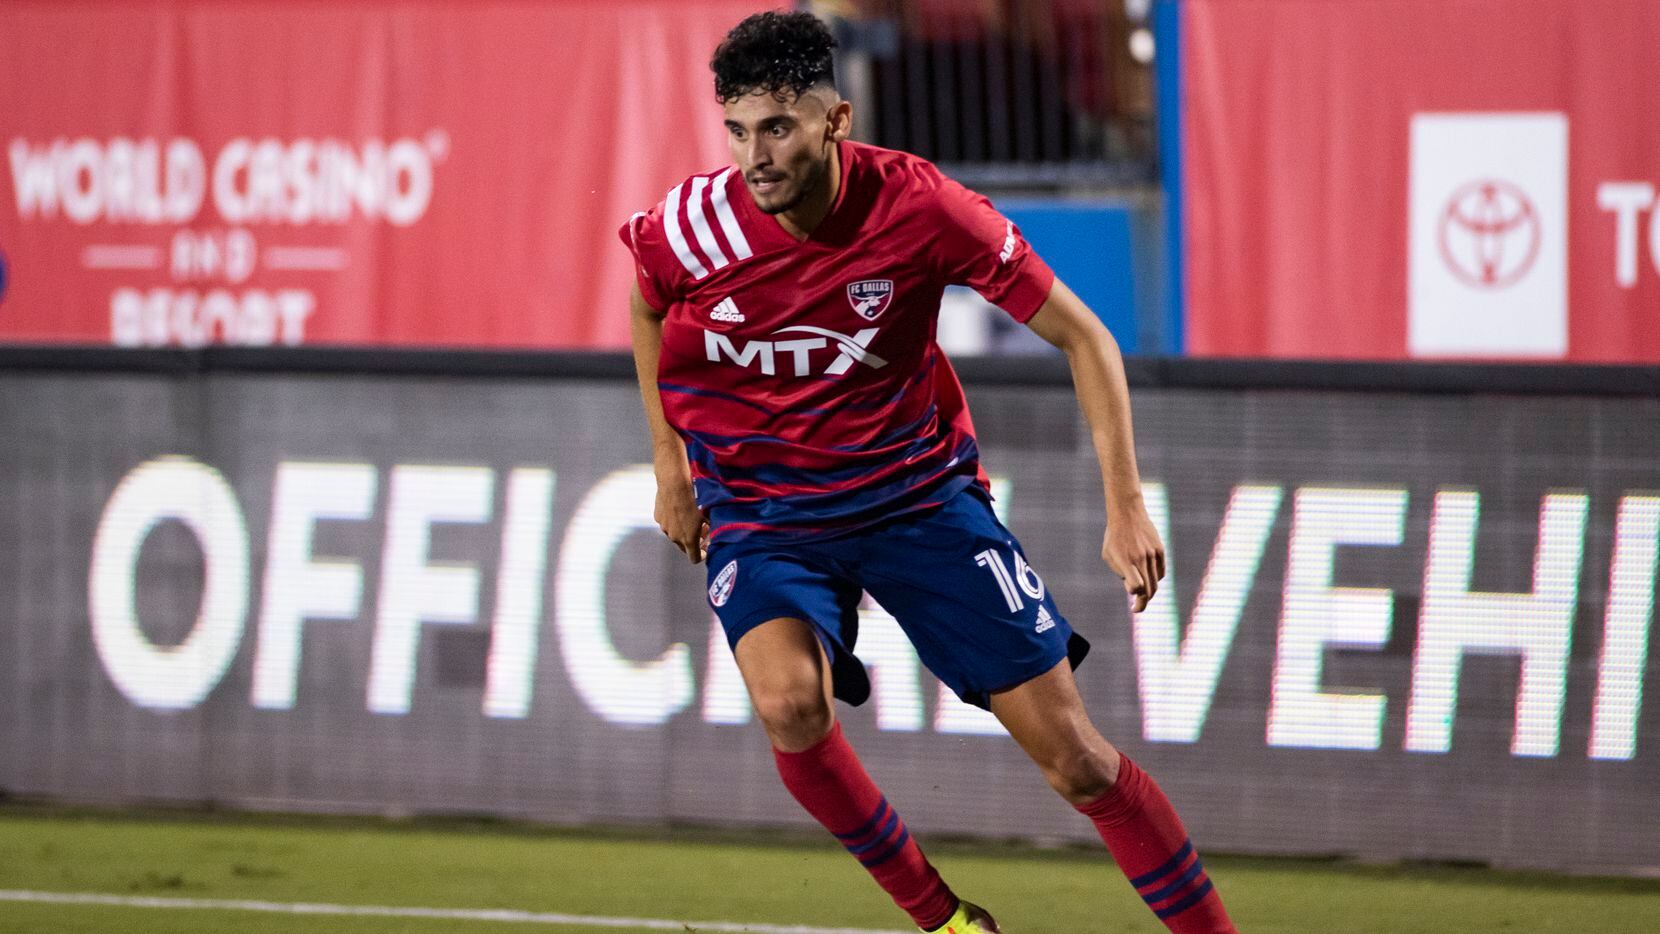 FC Dallas forward Ricardo Pepi (16) looks to make a move to score during FC DallasÕ home game against the San Jose Earthquakes at Toyota Stadium in Frisco, Texas on Saturday, September 11, 2021.